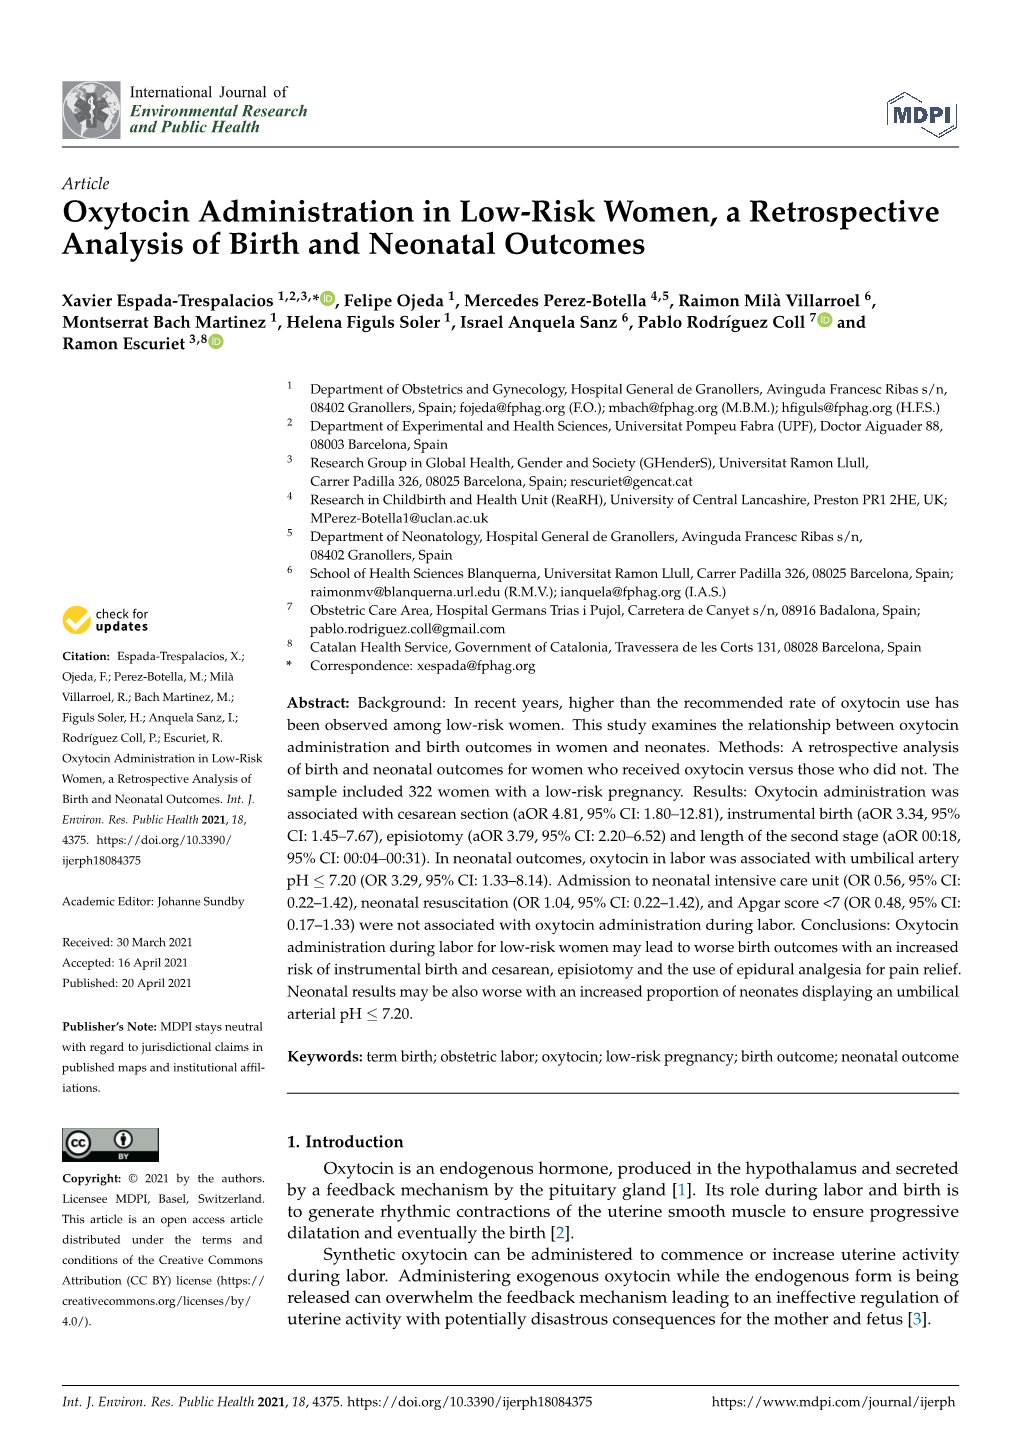 Oxytocin Administration in Low-Risk Women, a Retrospective Analysis of Birth and Neonatal Outcomes